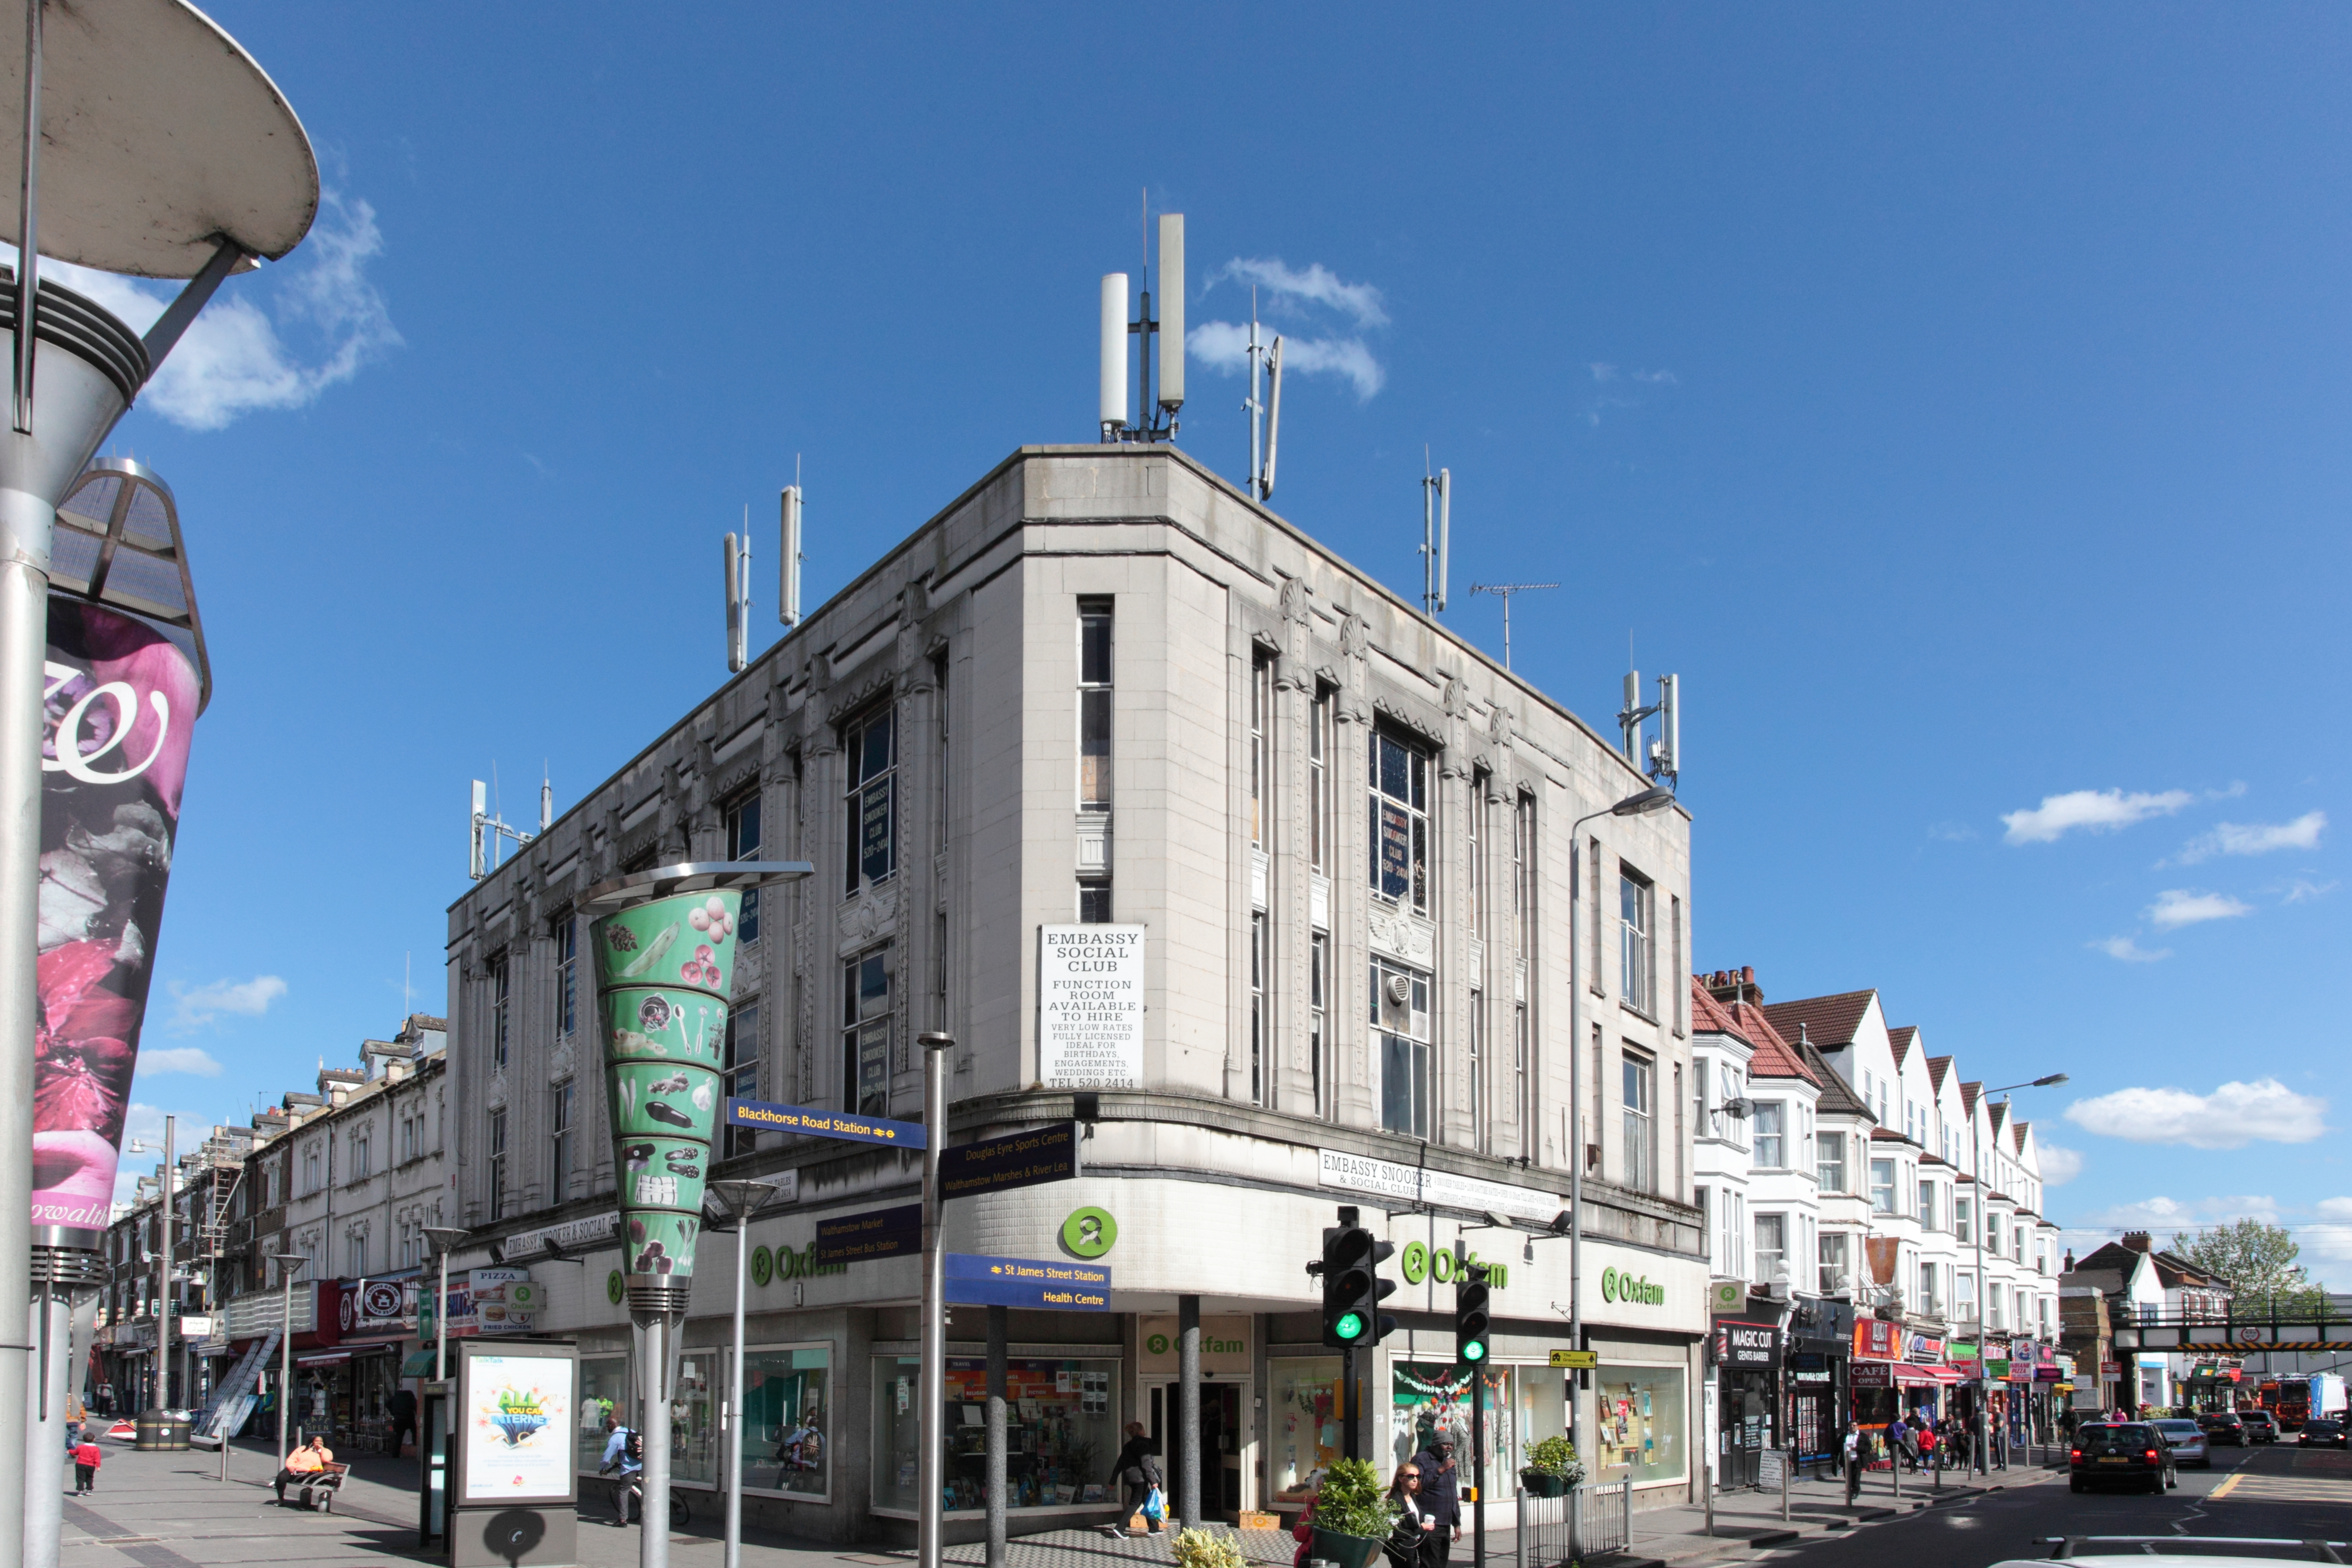 Tenanted mixed-use building in prime retail position. Acquired unconditionally. High Street, E17. London Borough of Waltham Forest.